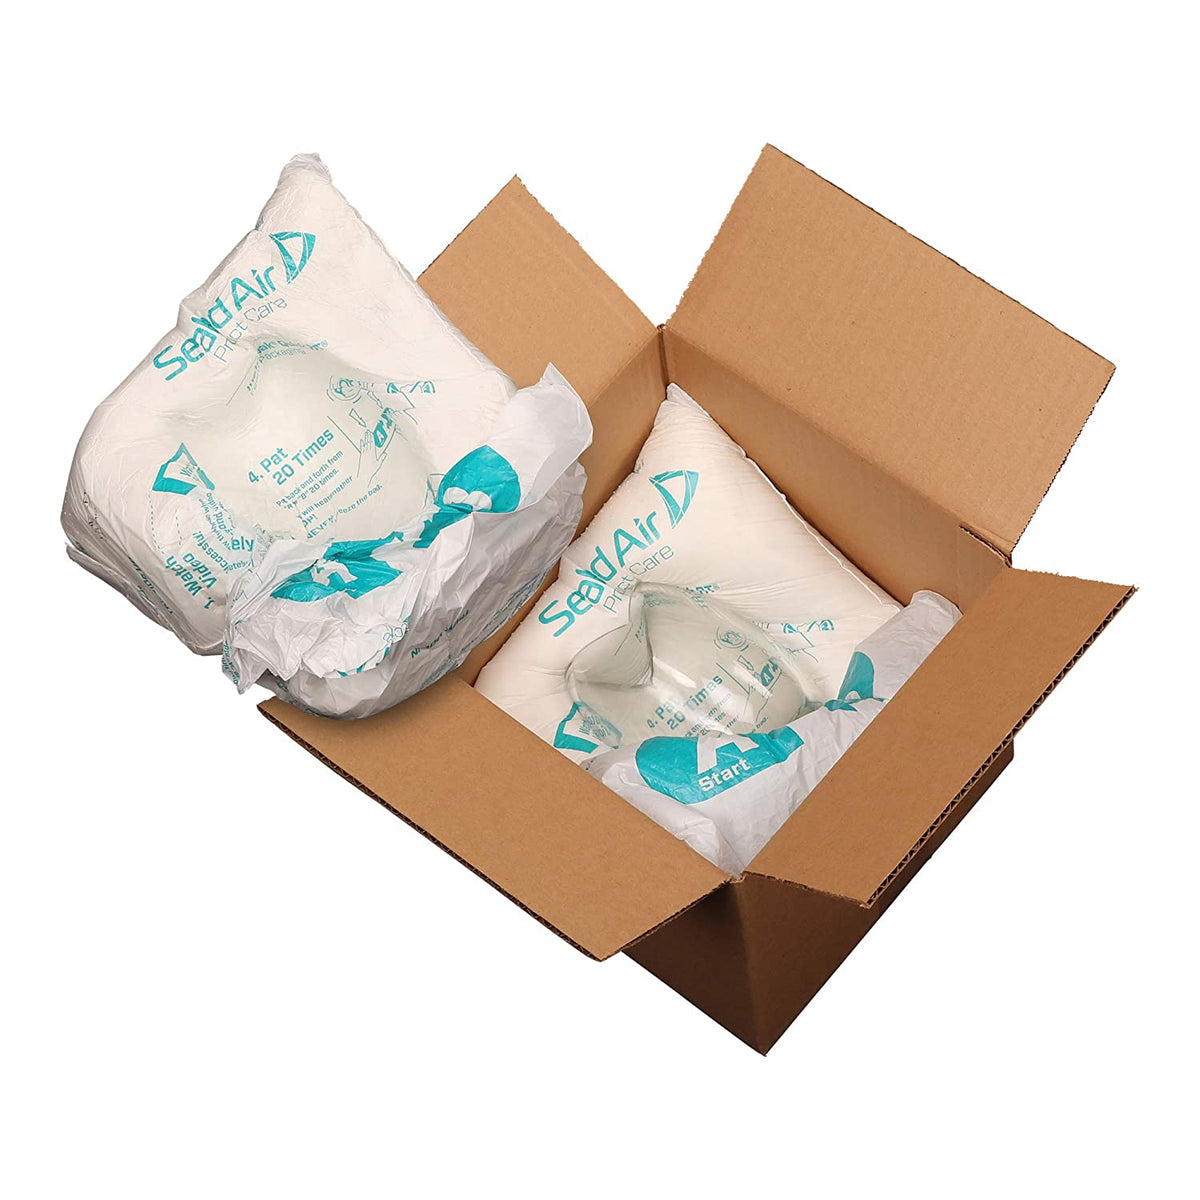 Sealed Air Instapak Quick RT #60 Heavy Duty Expandable Foam Bag, for 14x14x14 Box, Case of 104, Expandable Foam Packaging Bags for Shipping Boxes